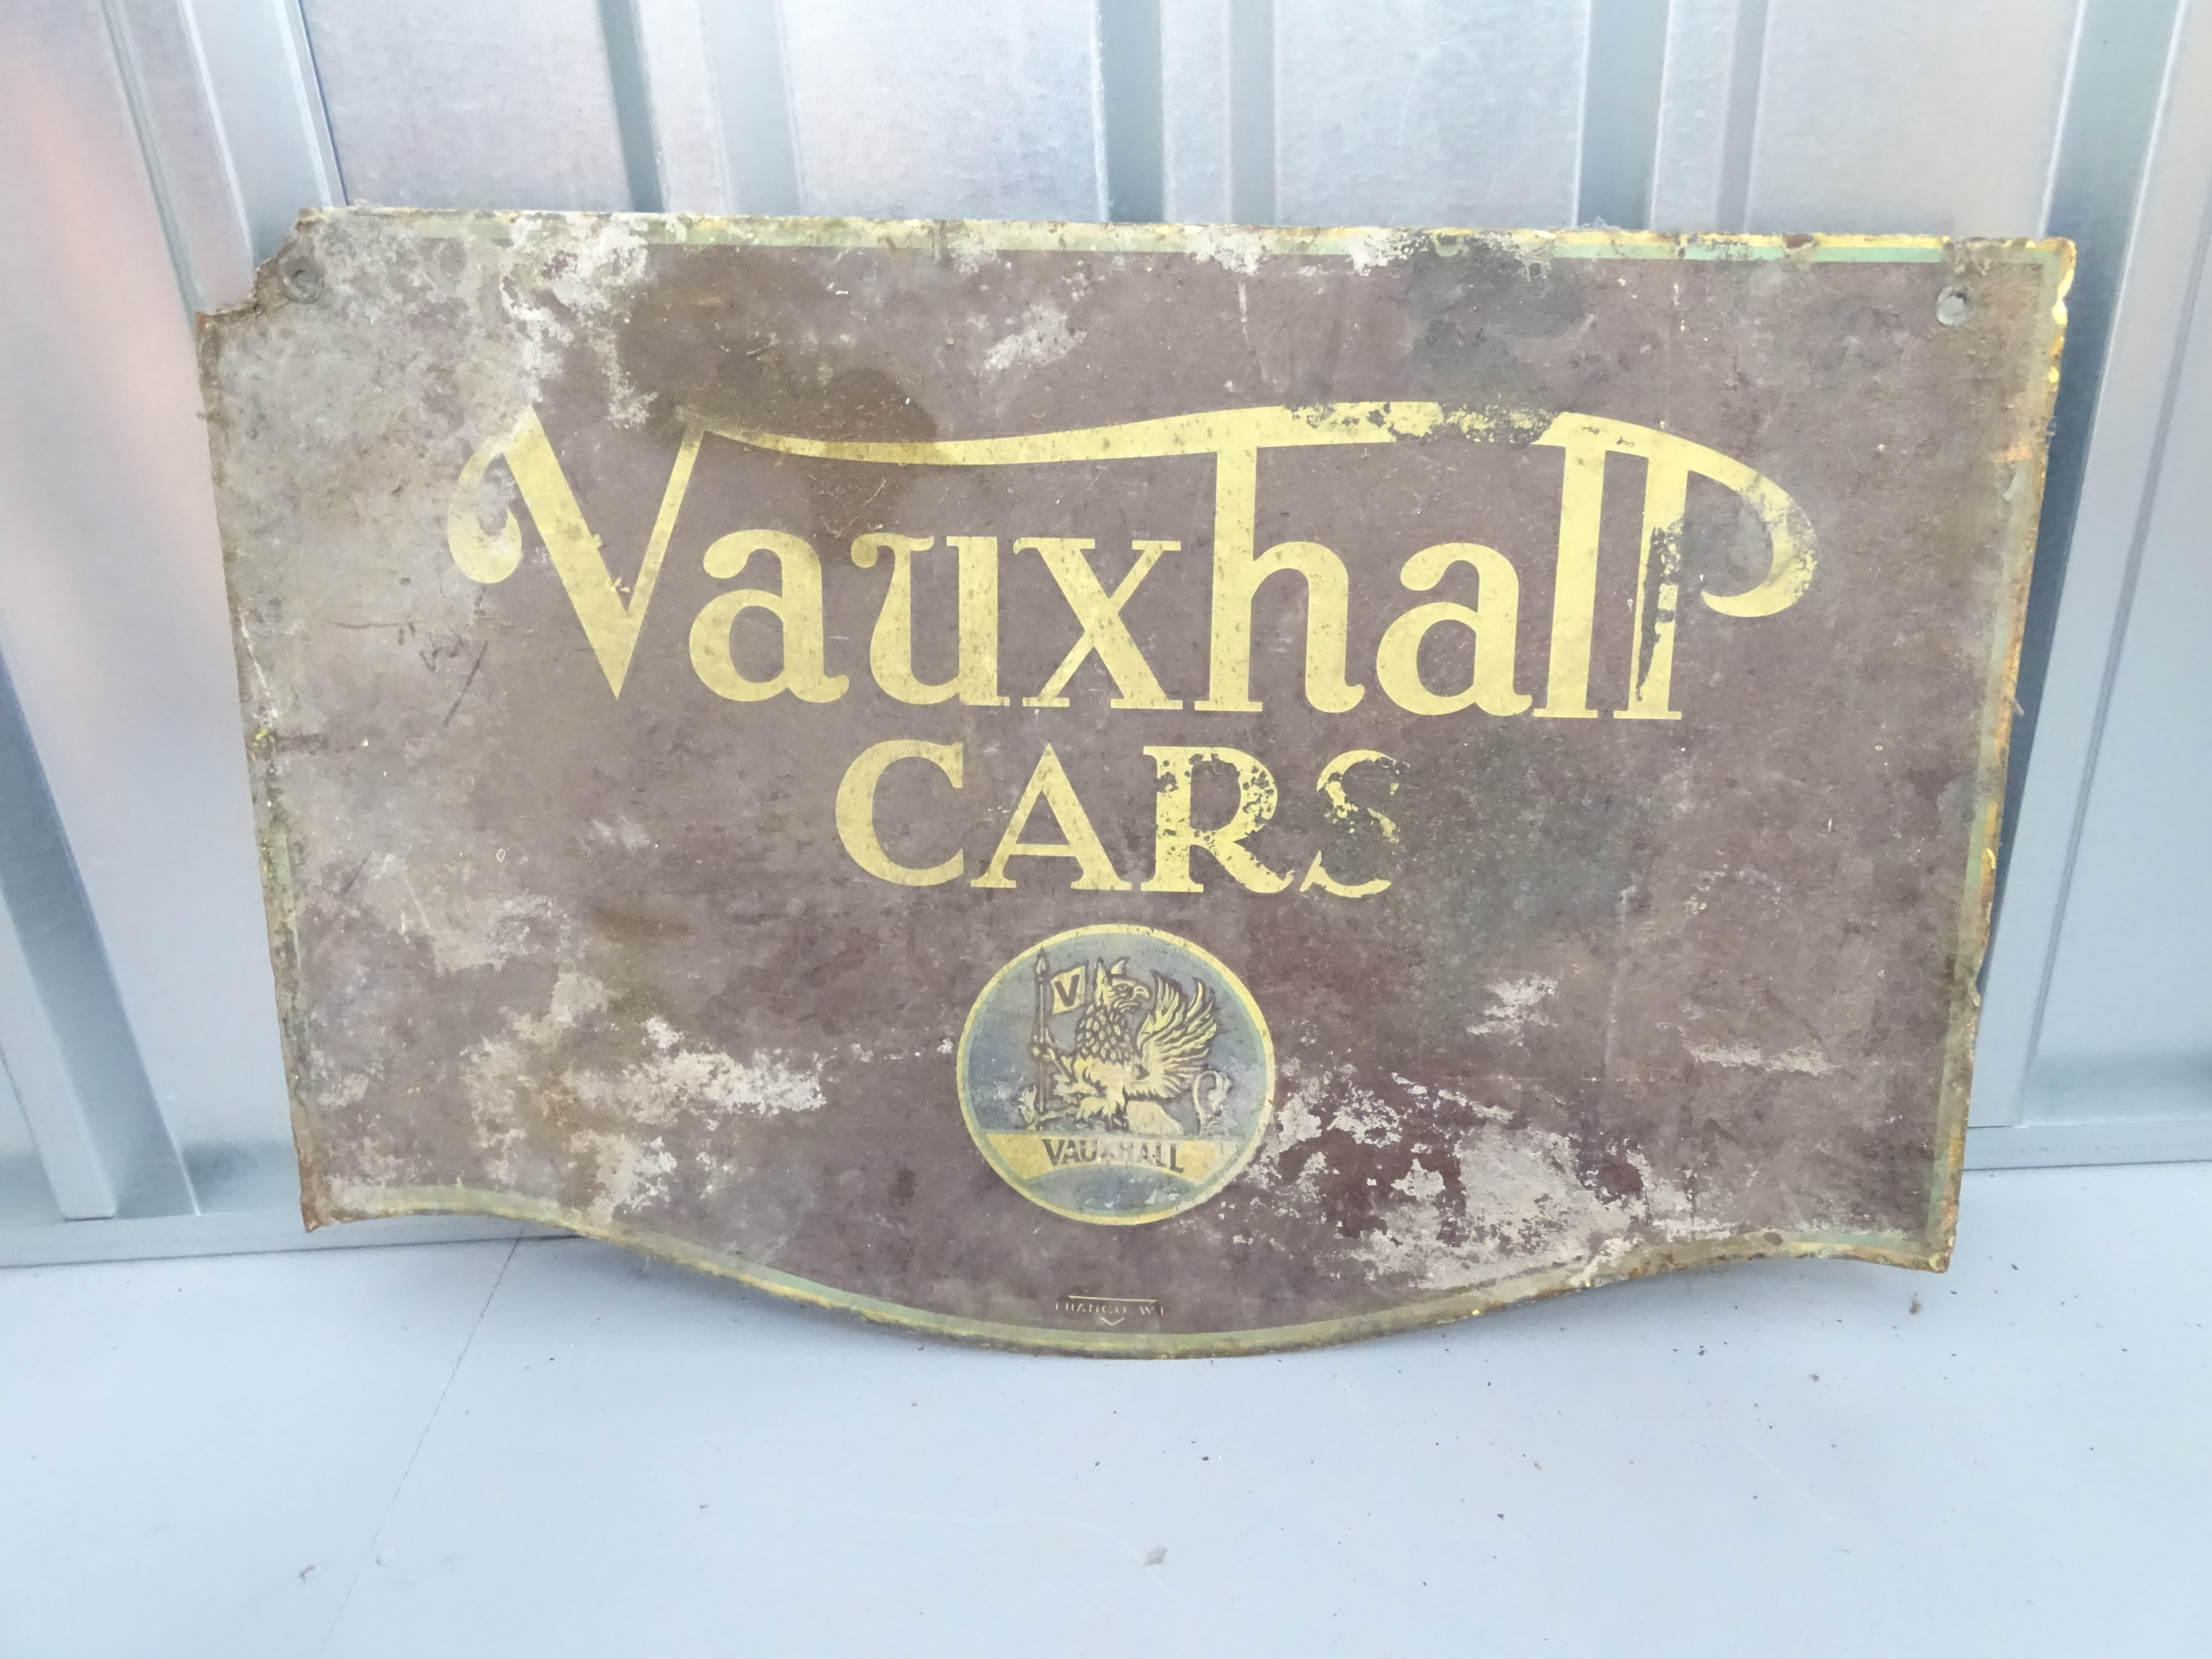 VAUXHALL CARS (30" x 20" at widest point) - enamel double sided advertising sign